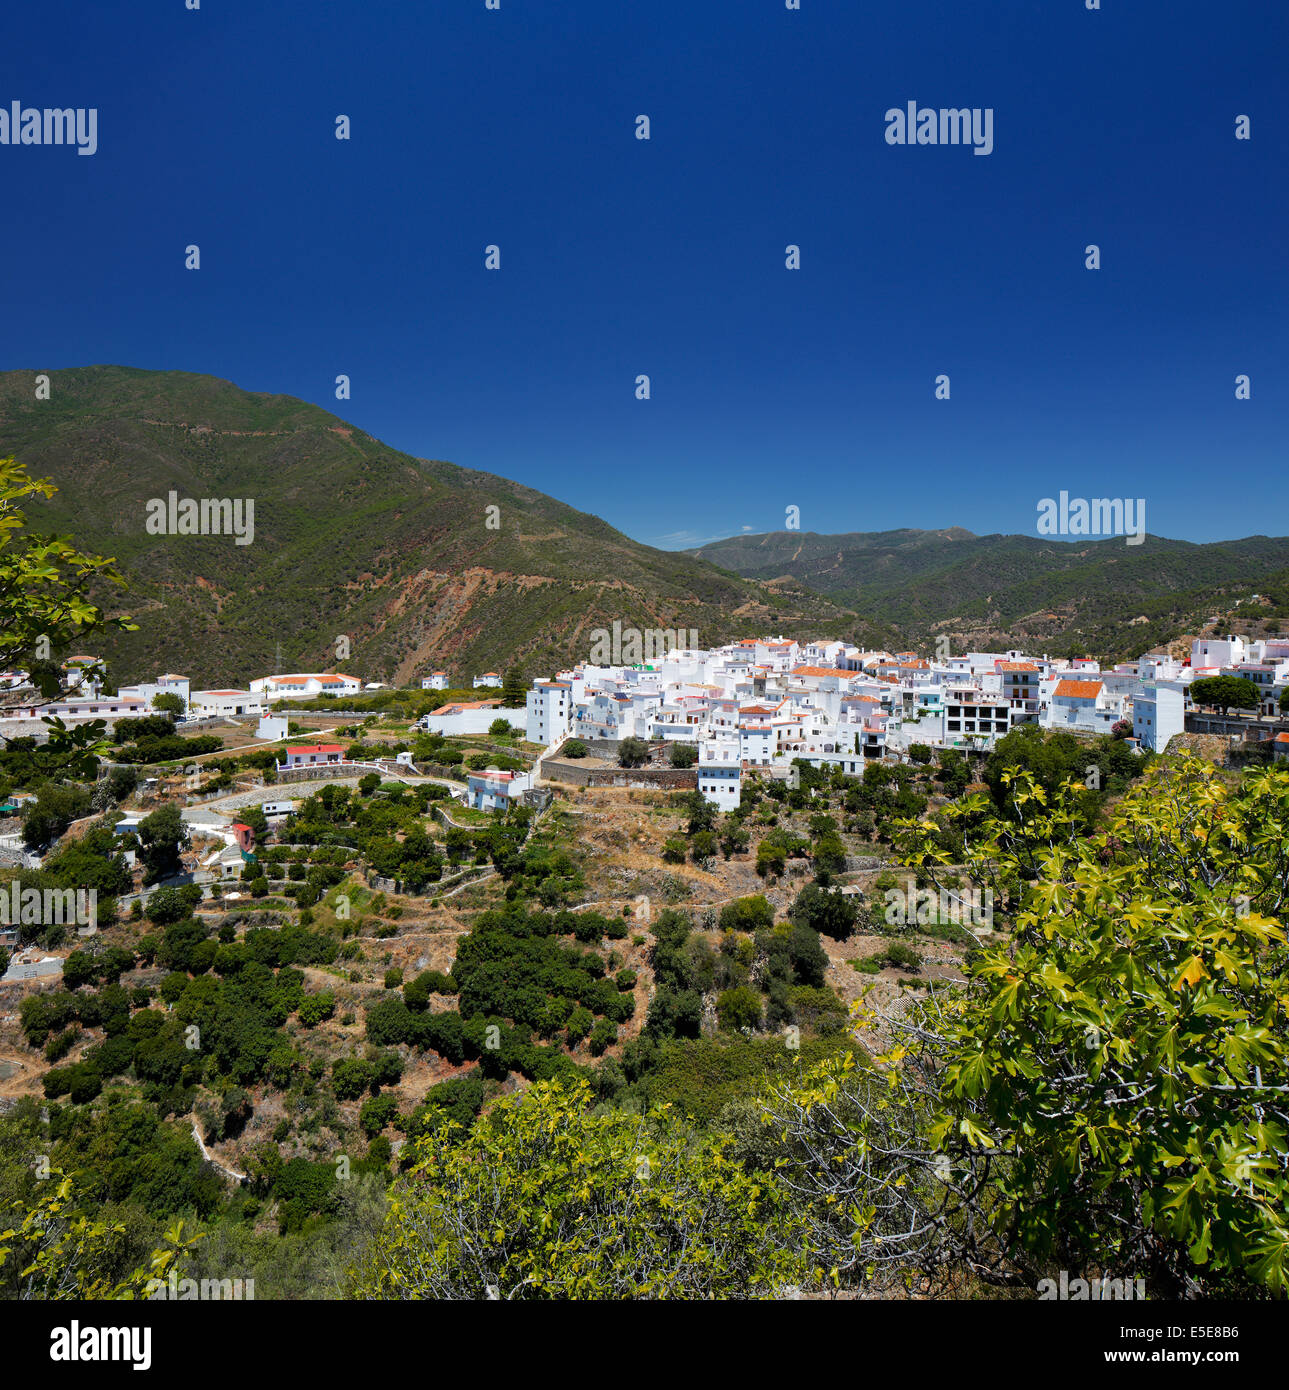 Istan is a beautiful town in the Malaga province in Andalusia, Southern Spain. It lies beneath the Sierra Blanca mountain Stock Photo